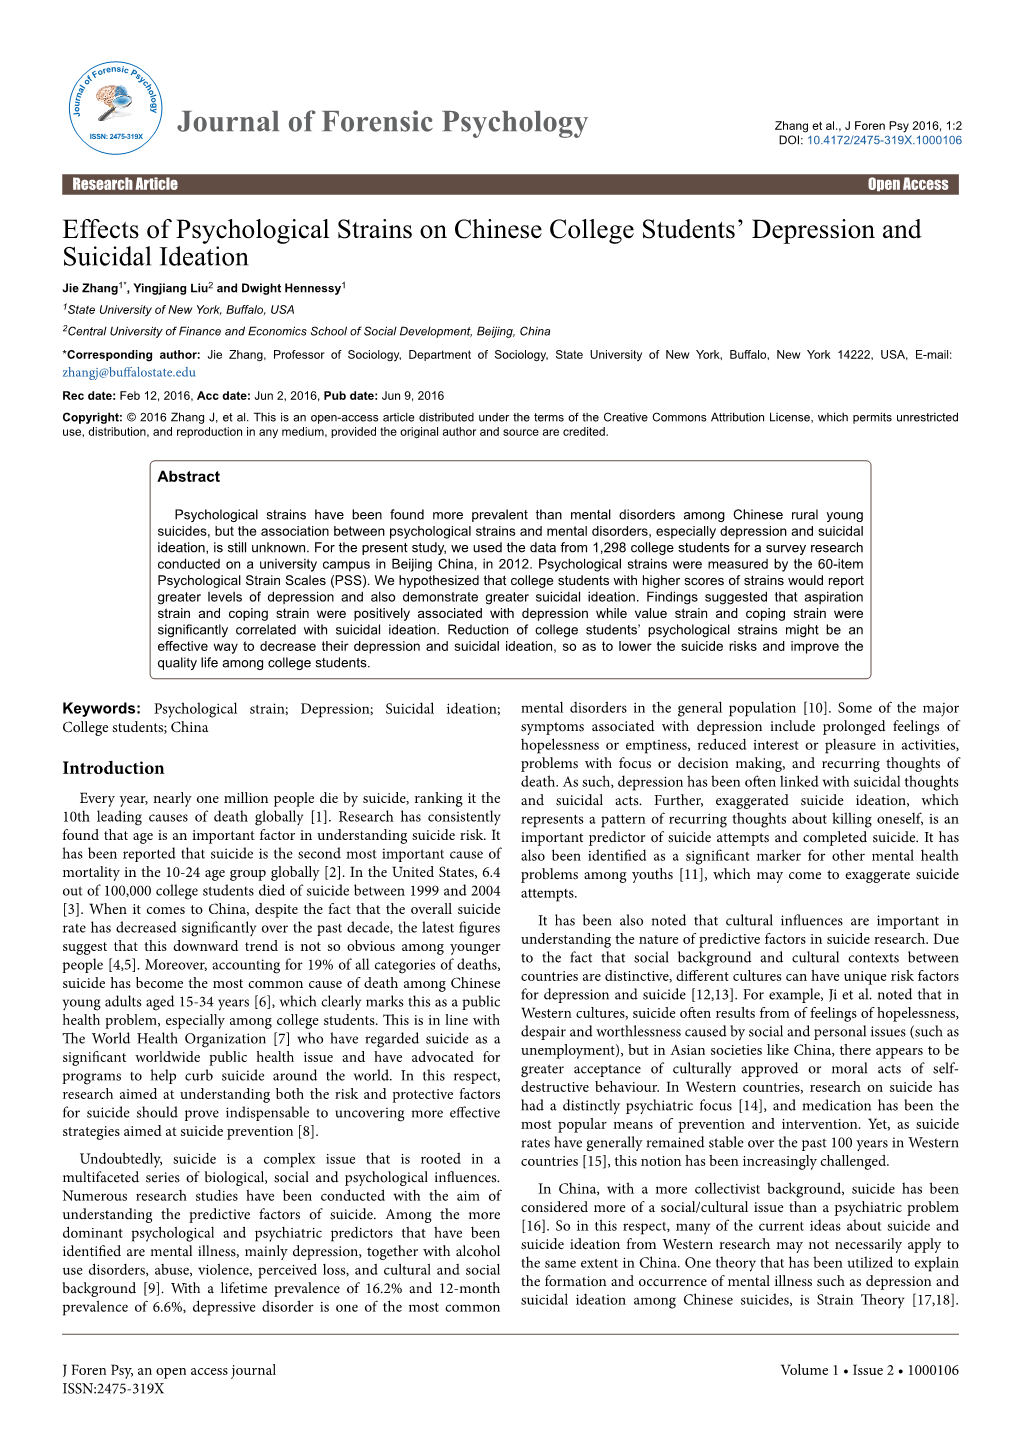 Effects of Psychological Strains on Chinese College Students